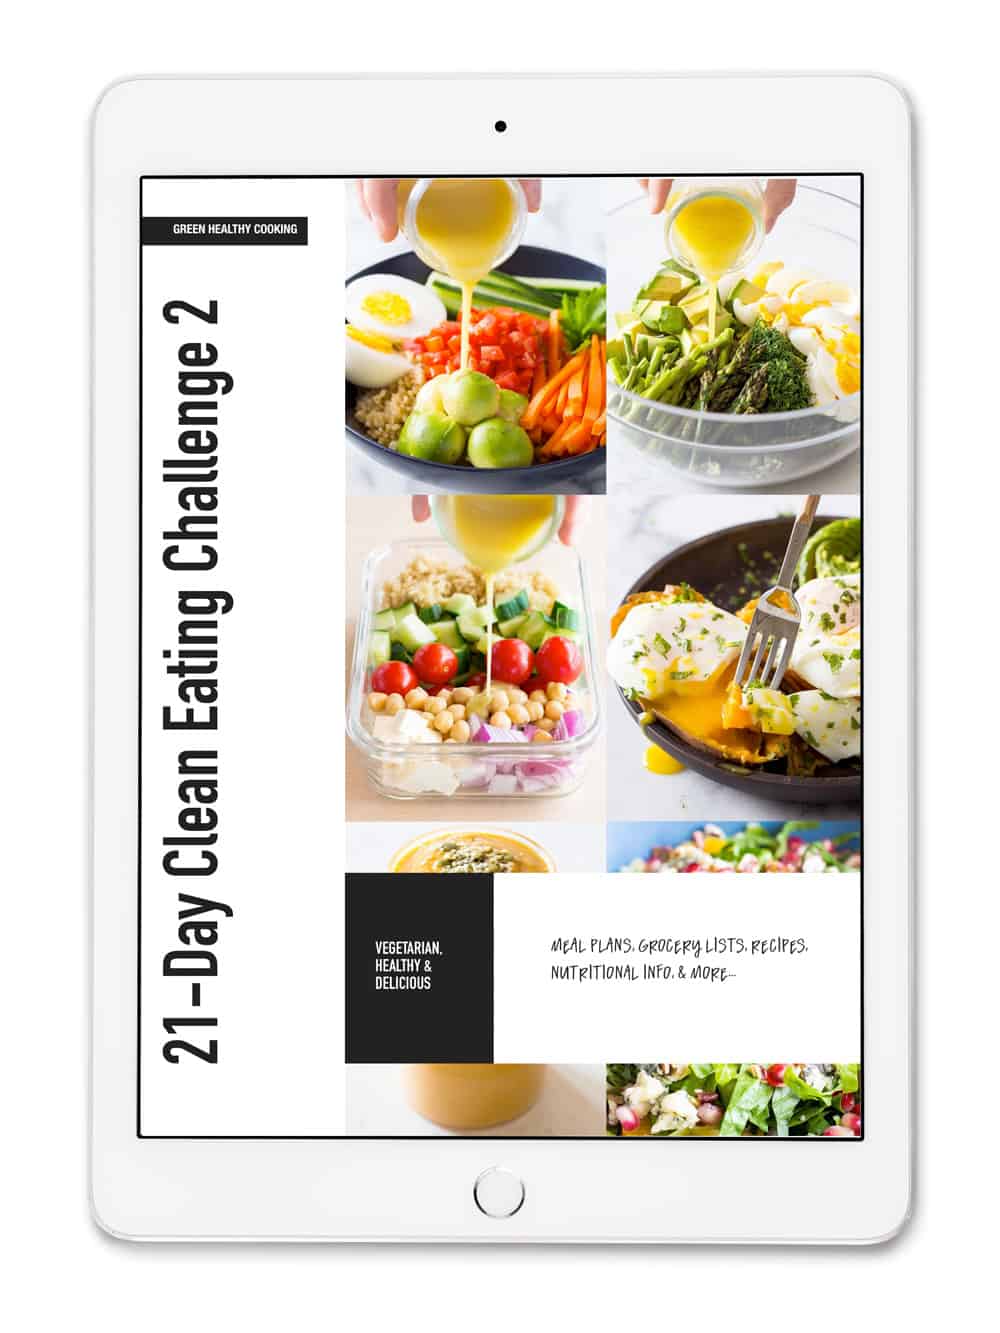 21-Day Clean Eating Challenge Vegetarian E-book Cover.